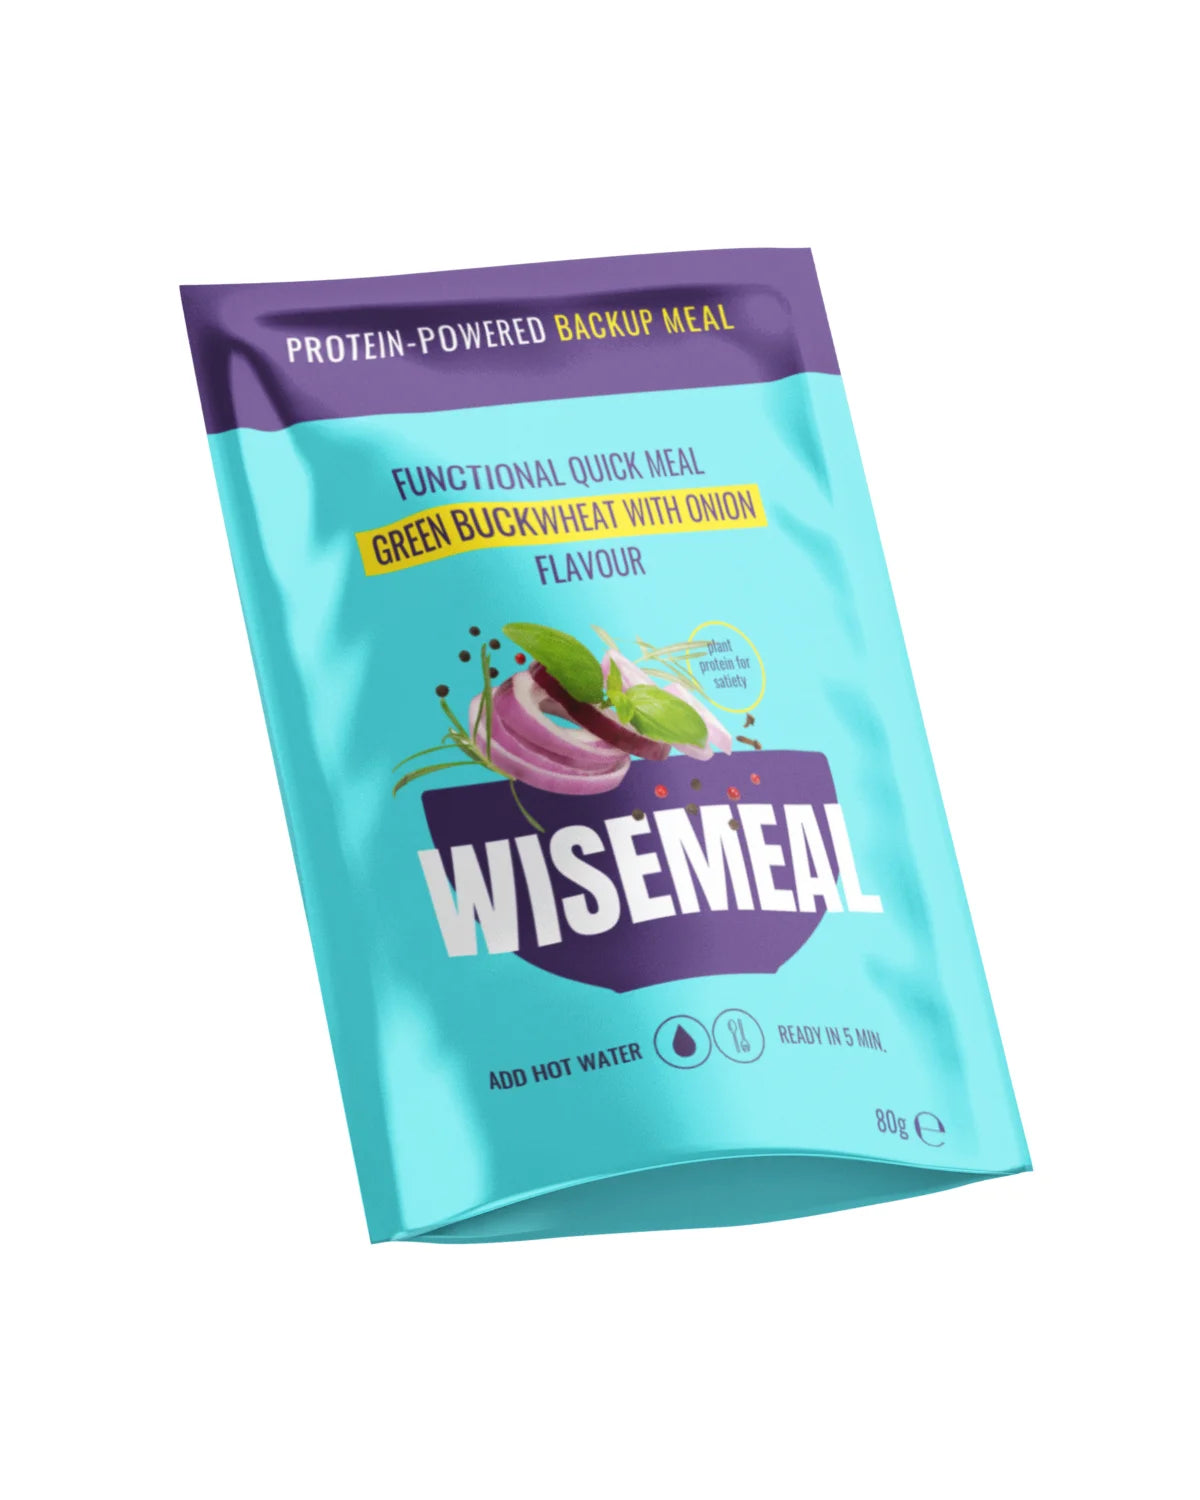 "Creamy" quick WISEMEAL with onion flavour